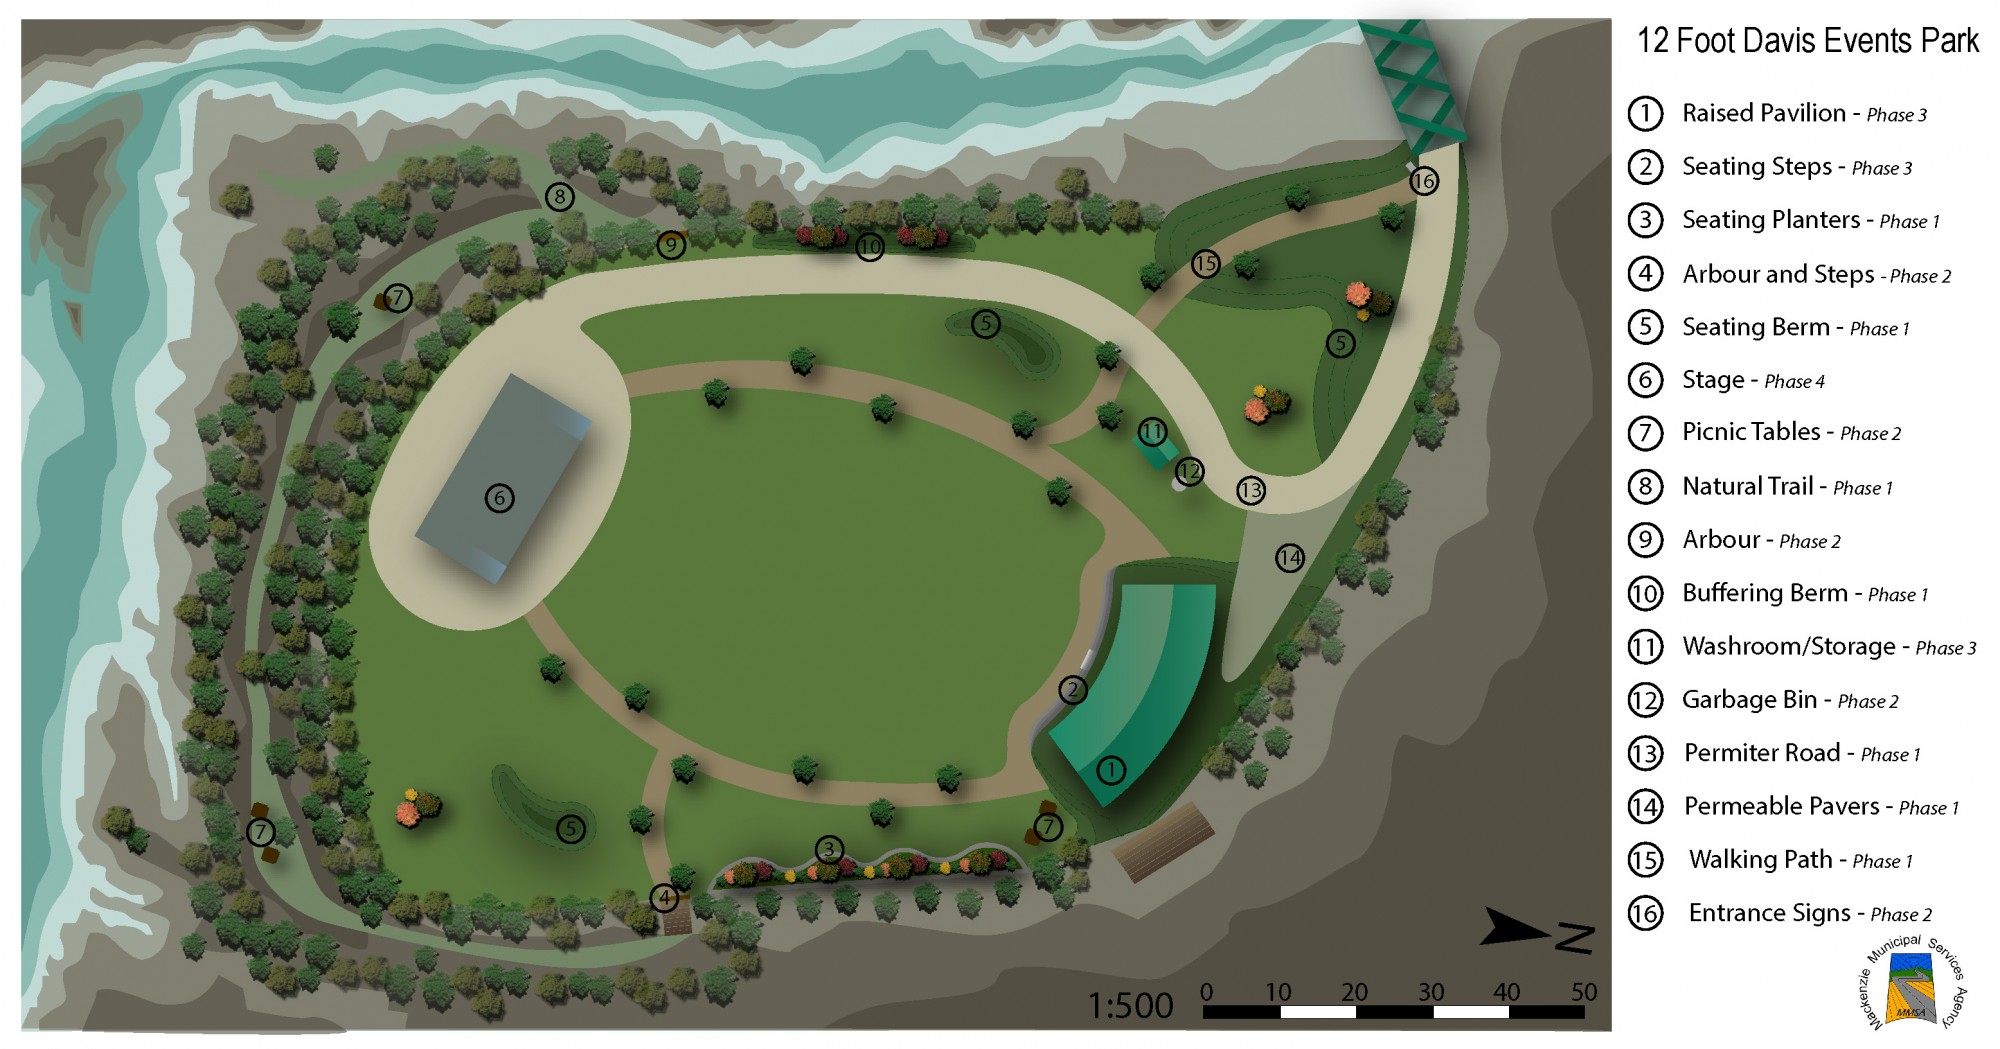 Pages from 12 Foot Davis Events Park FINAL DESIGN and BUDGET